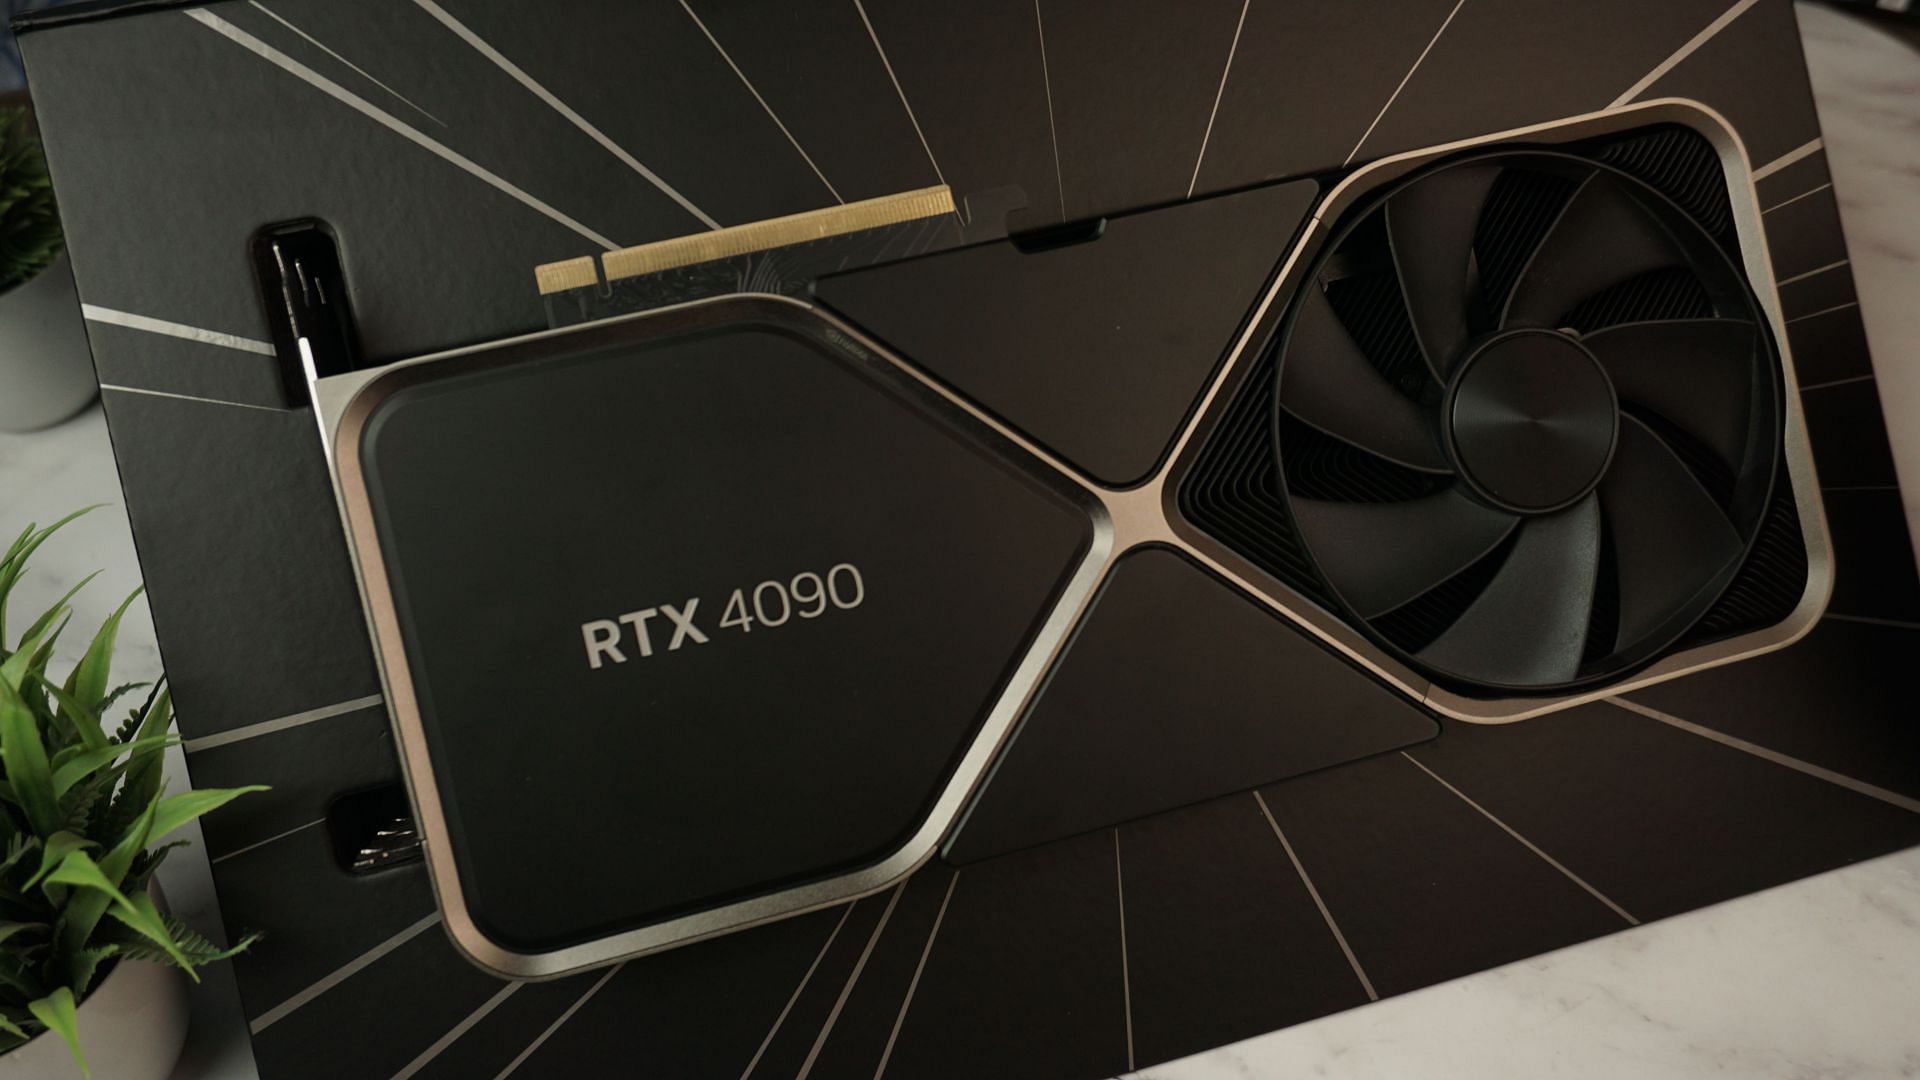 The RTX 4090 Founder